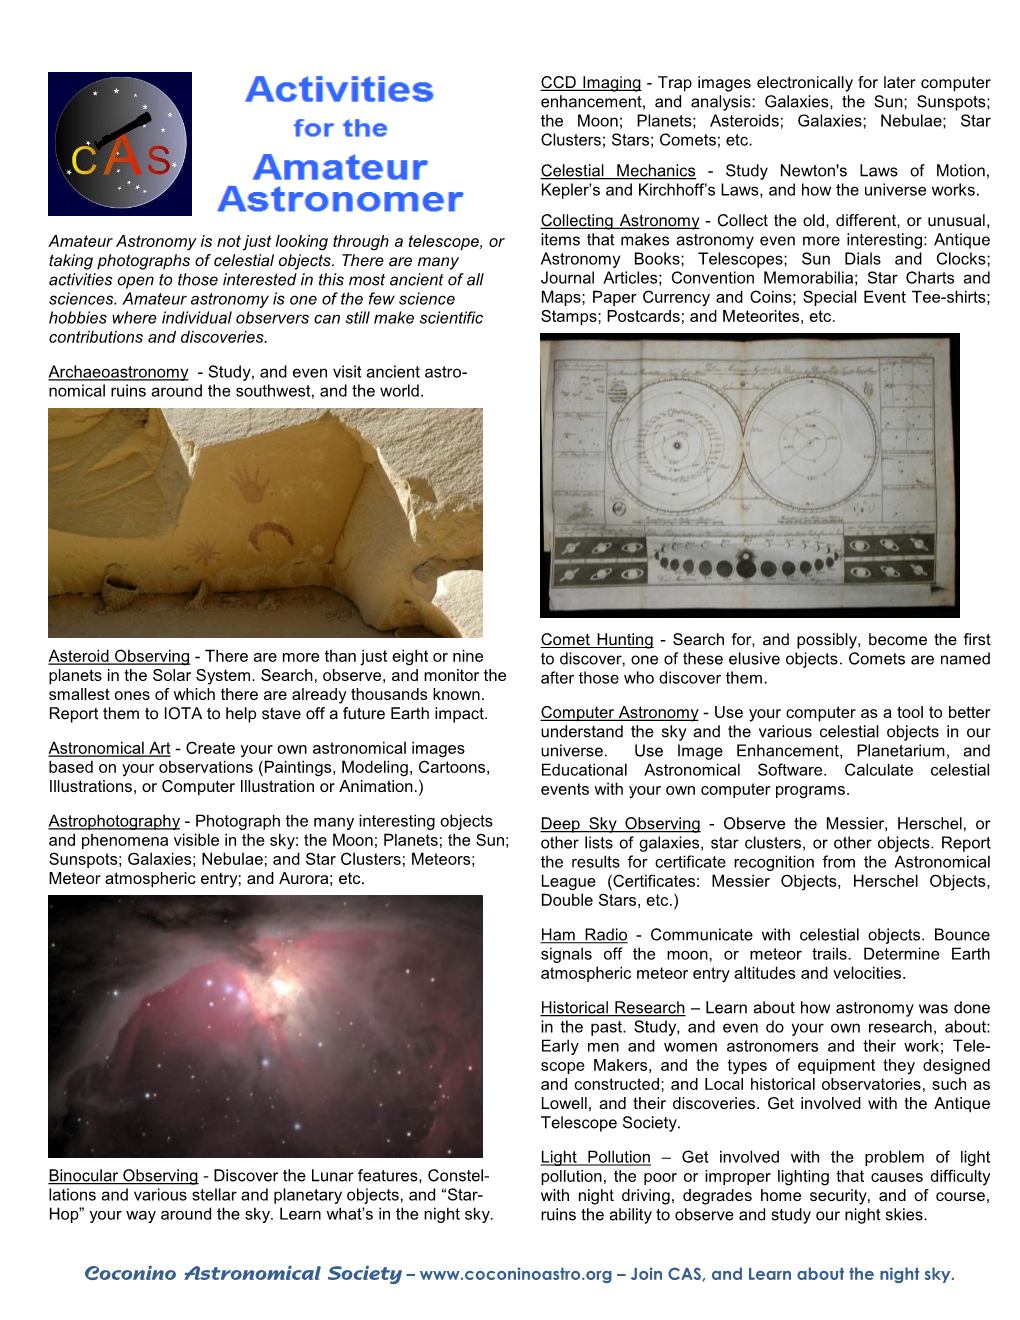 Activities for the Amateur Astronomer